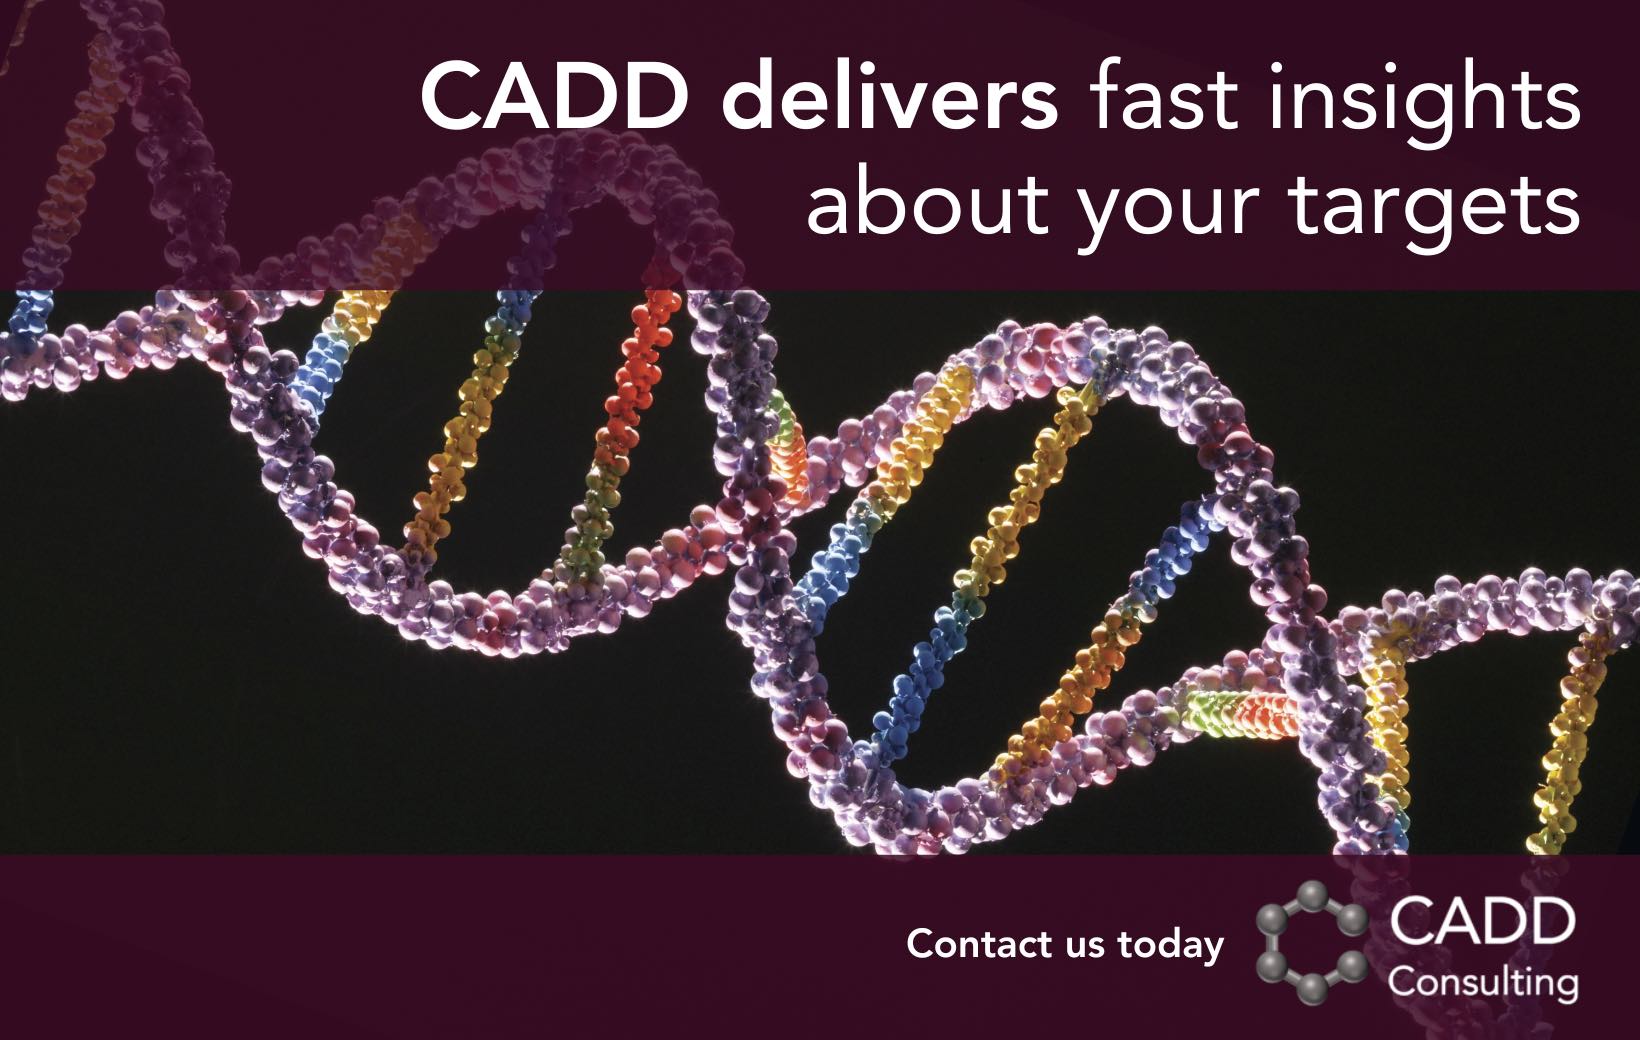 CADD delivers insights about your targets